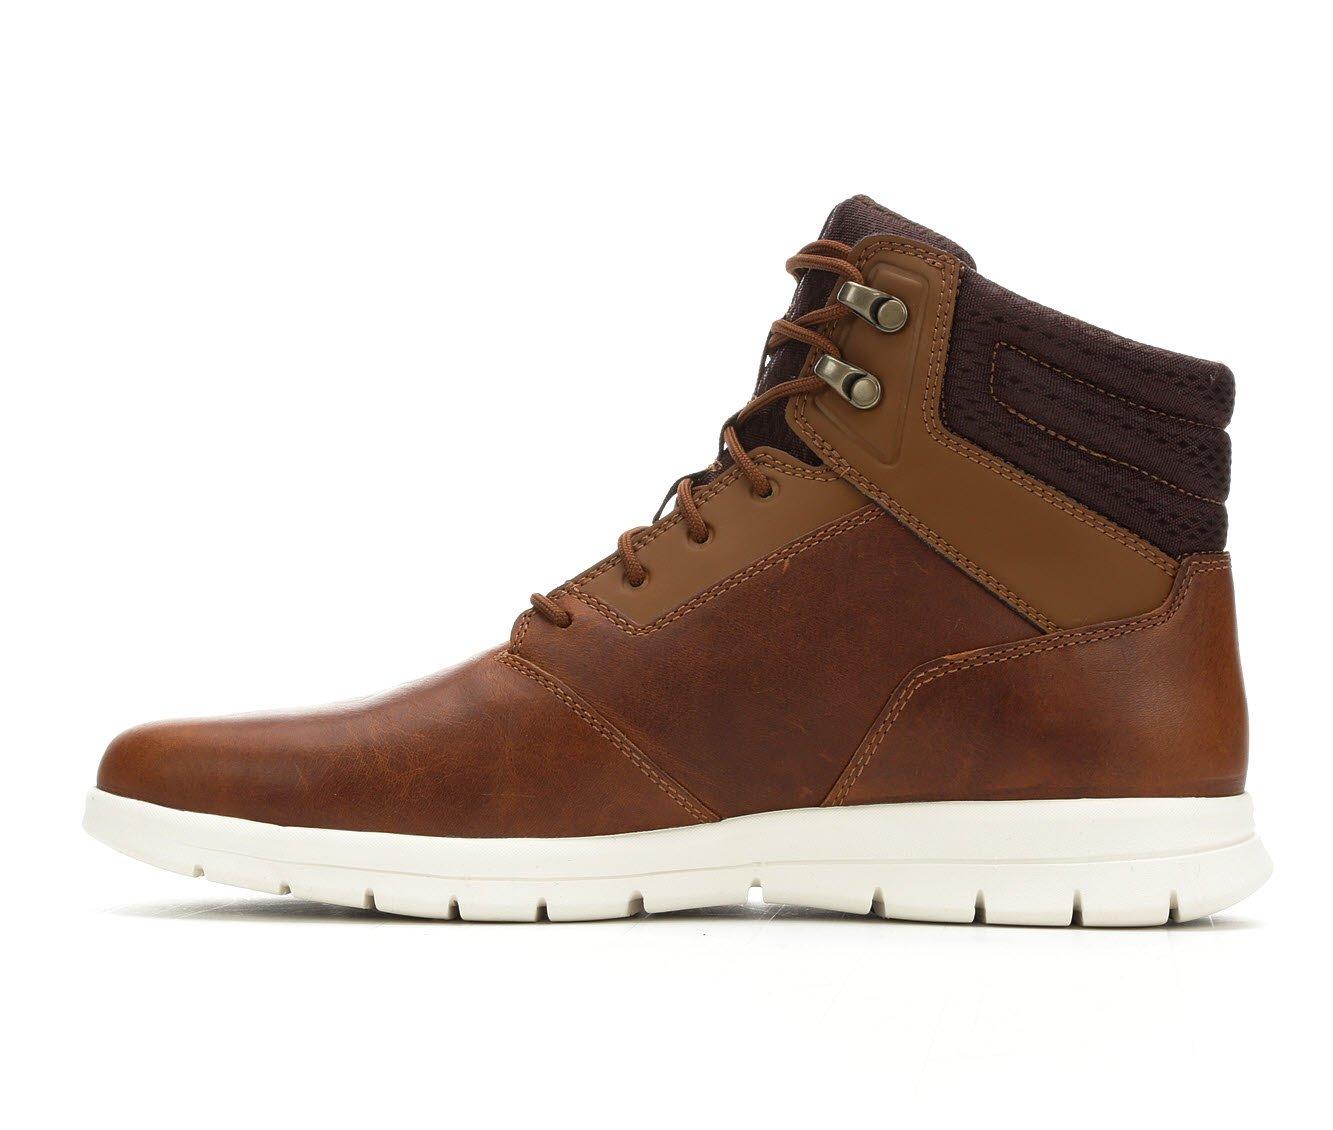 Men's Sneakers, Sneaker Boots and Boots